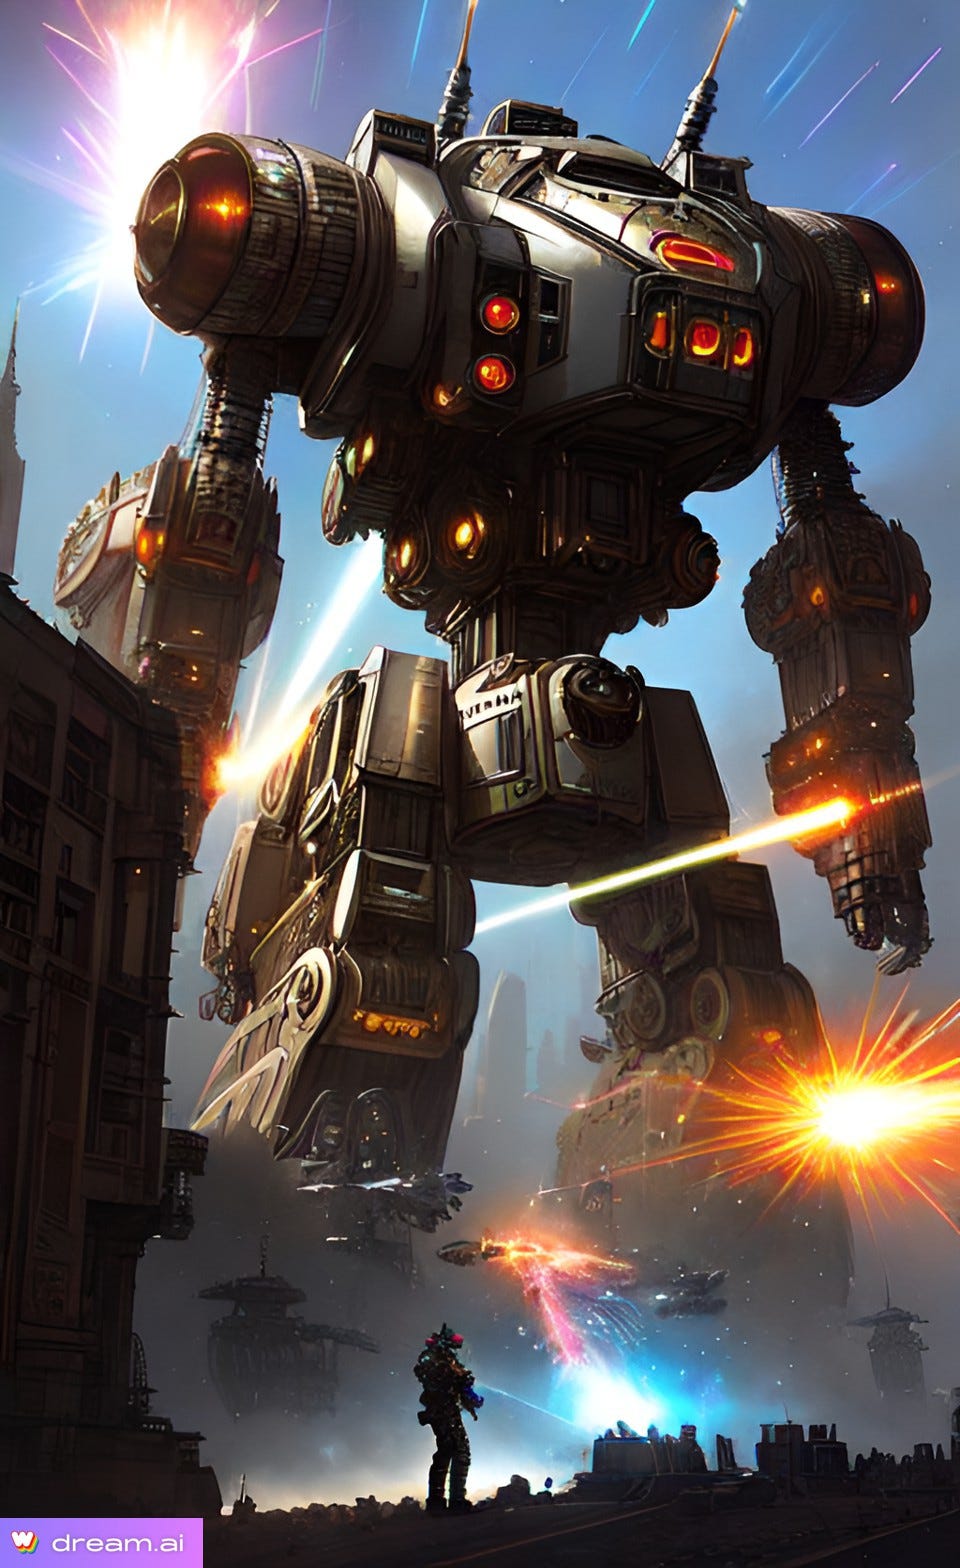 A.I. image of a giant mechanical robot blasting its way through a city